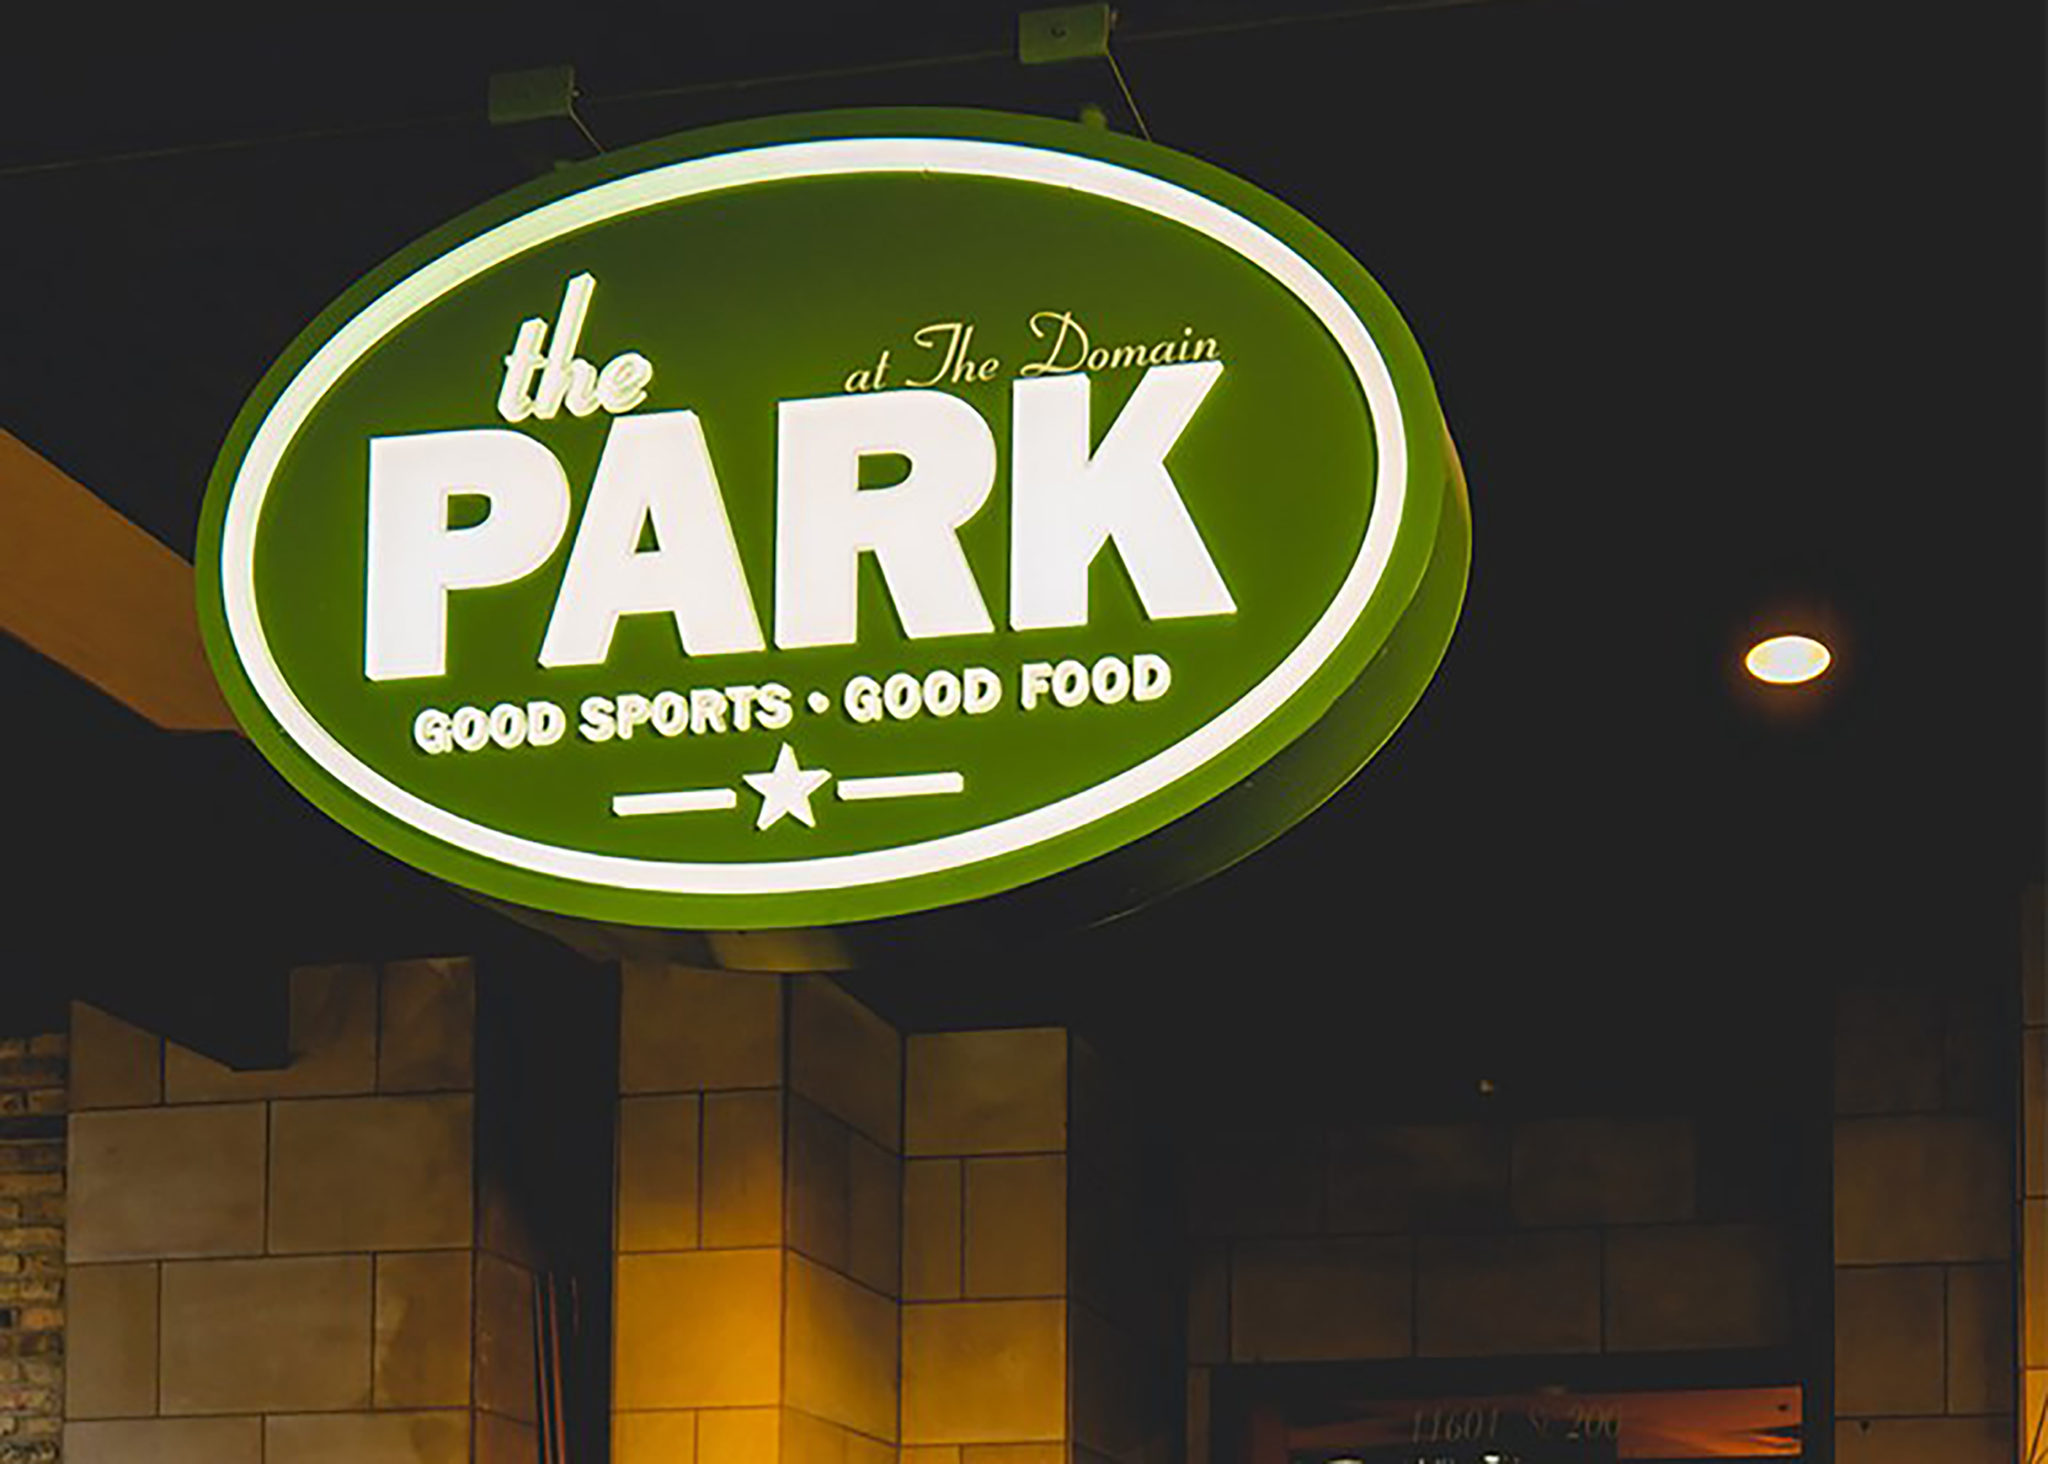 The Park at The Domain sign